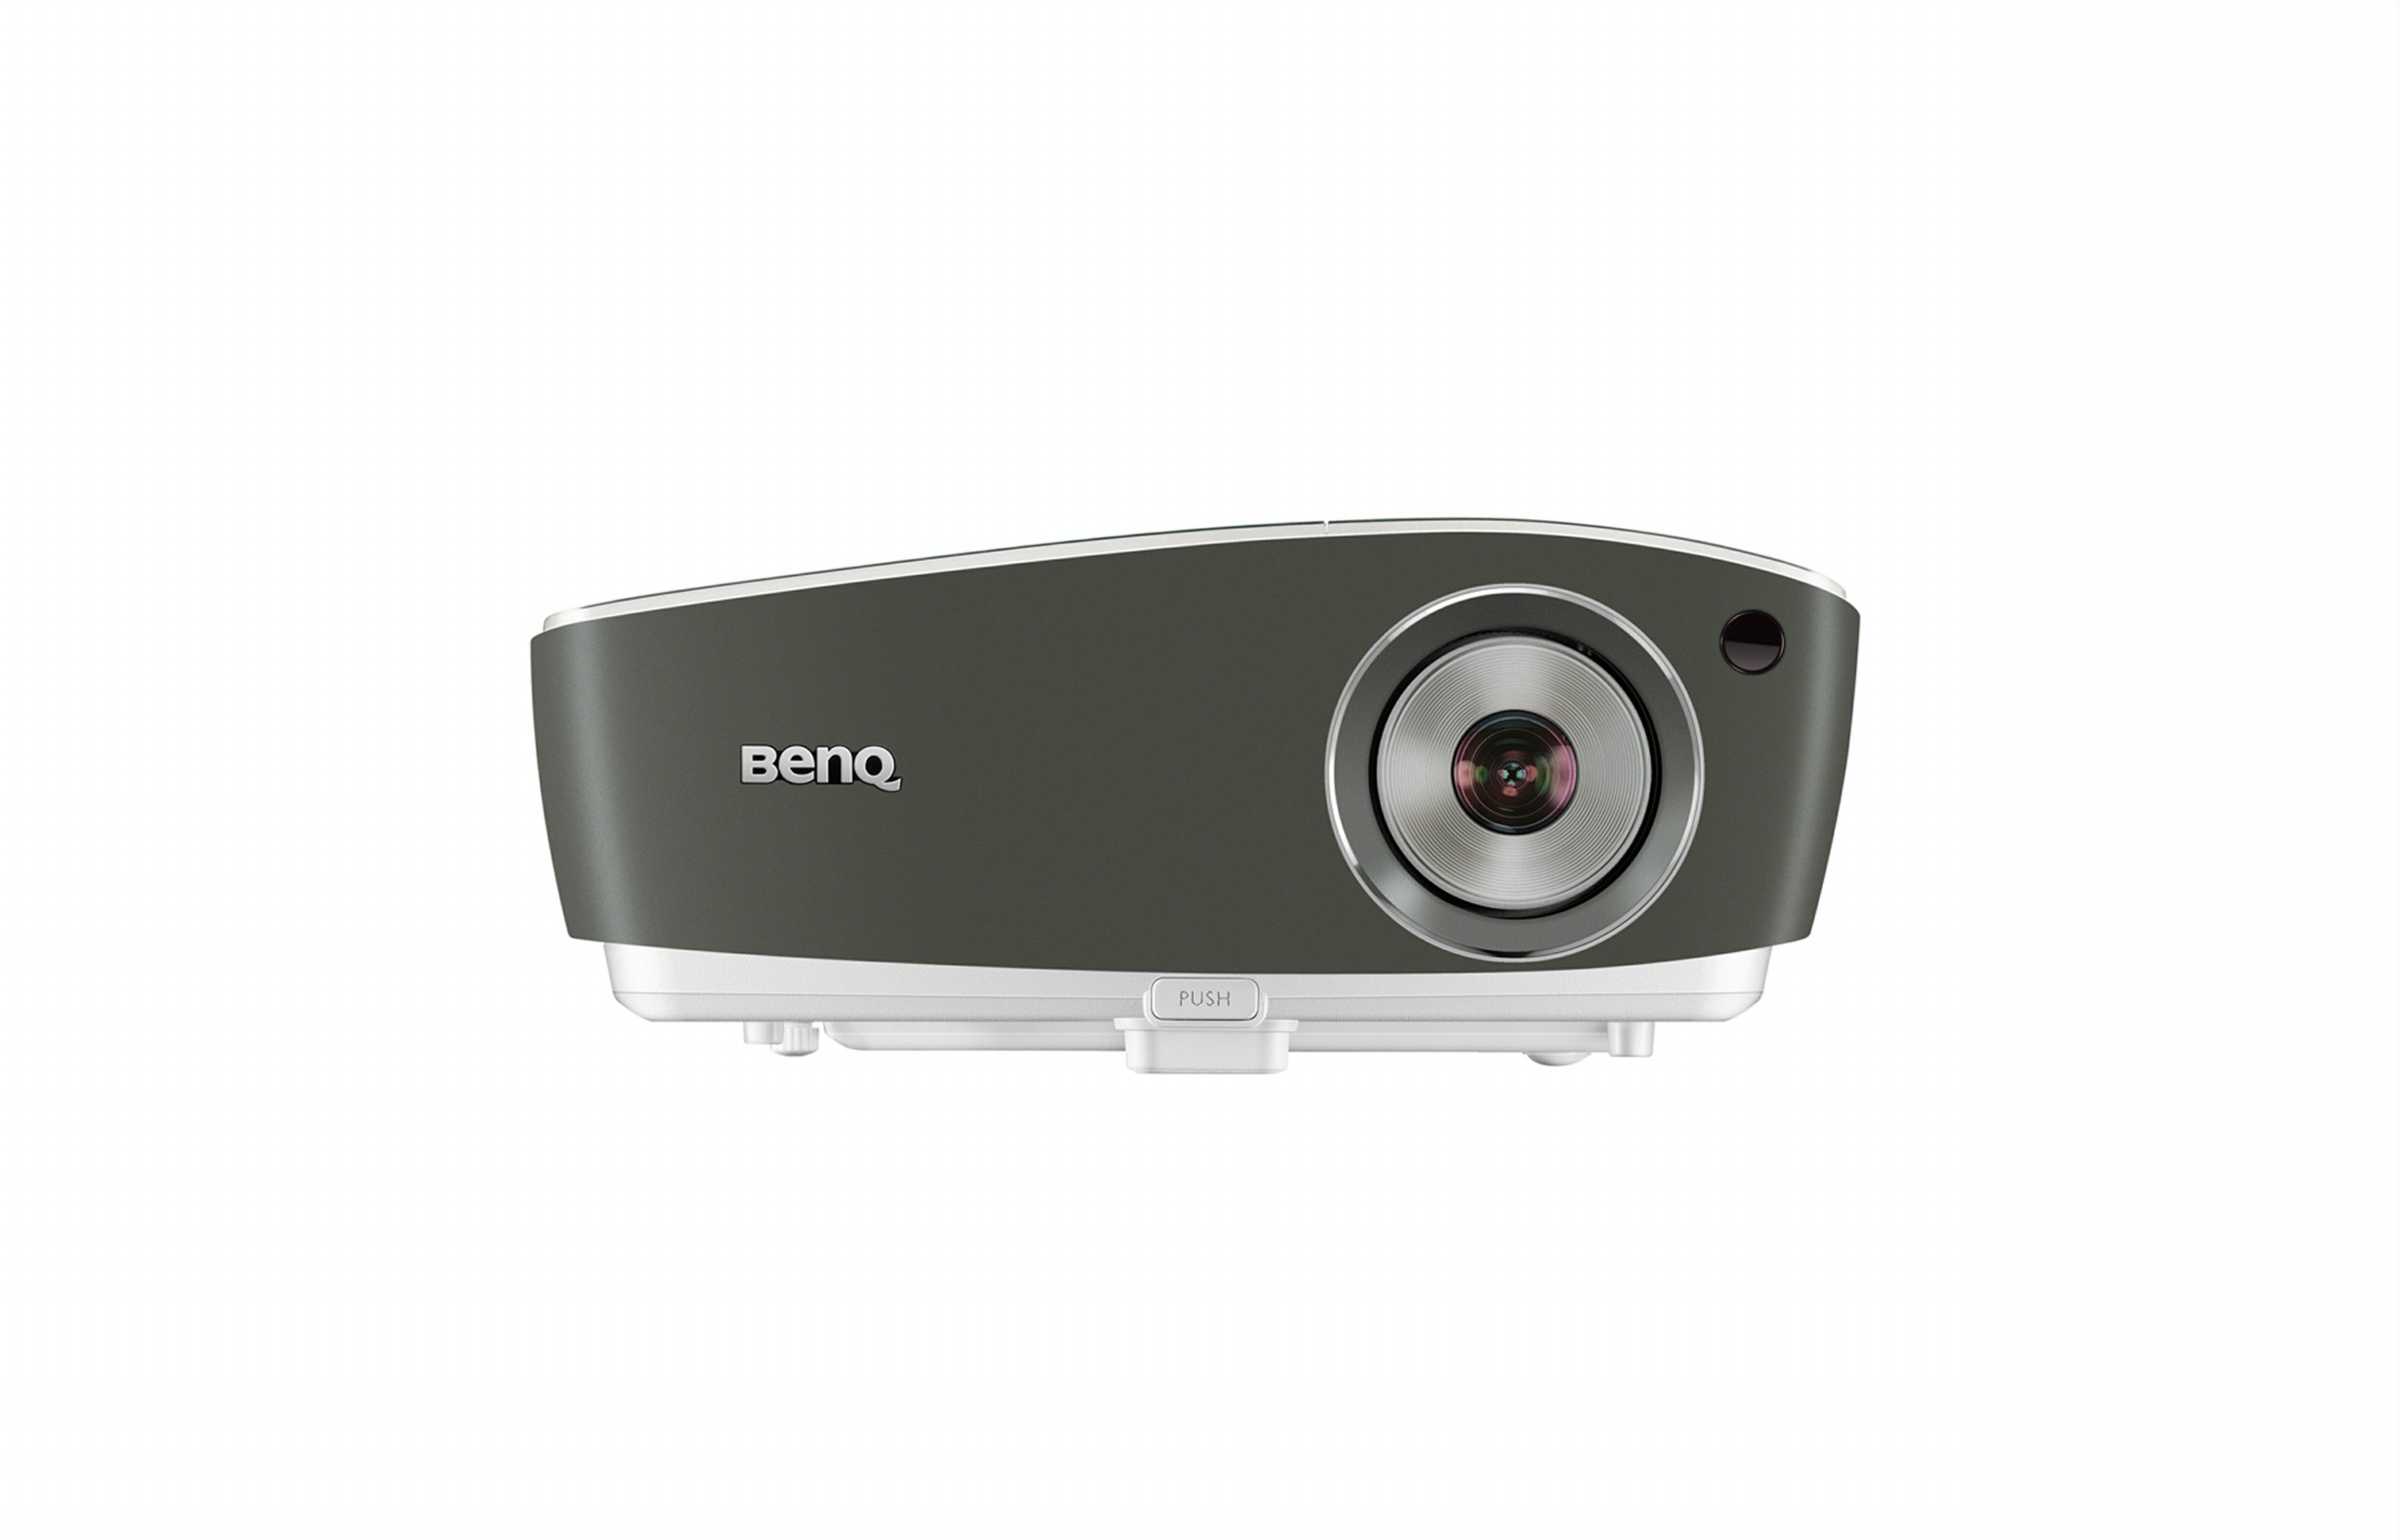 BenQ TH670 Home Theater Projector - Refurbished